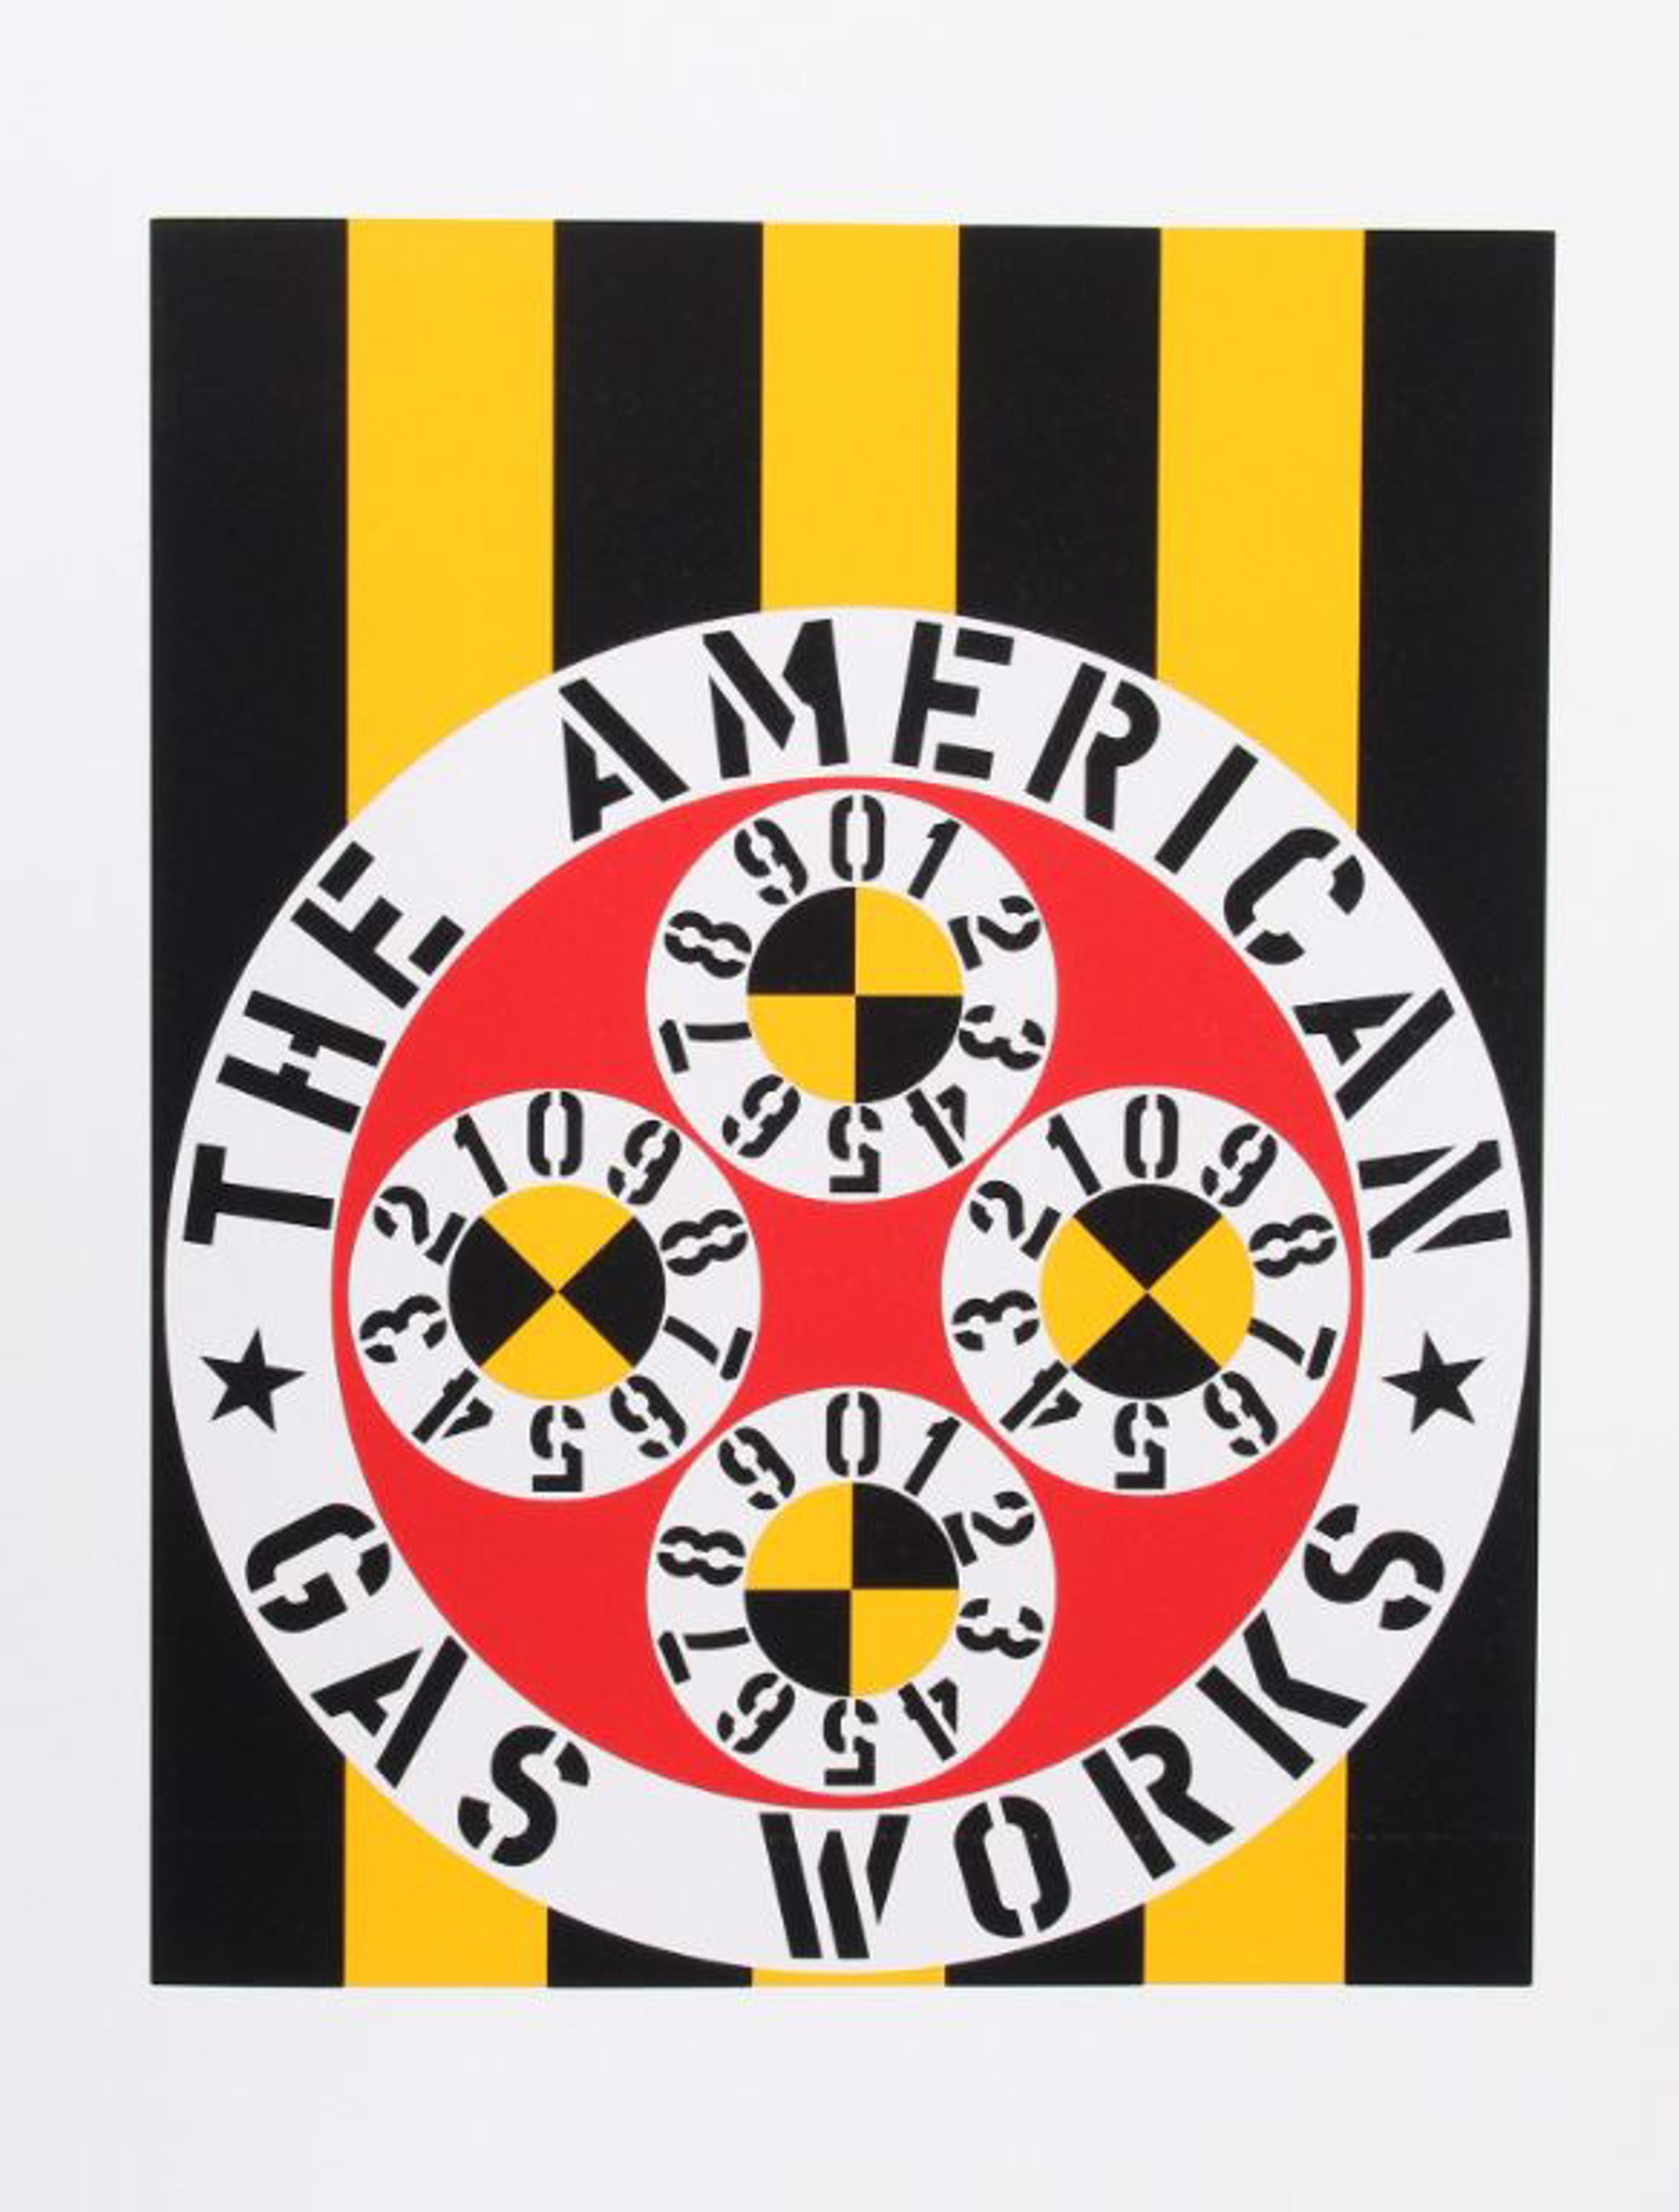 American Gas Works from The American Dream Portfolio by Robert Indiana